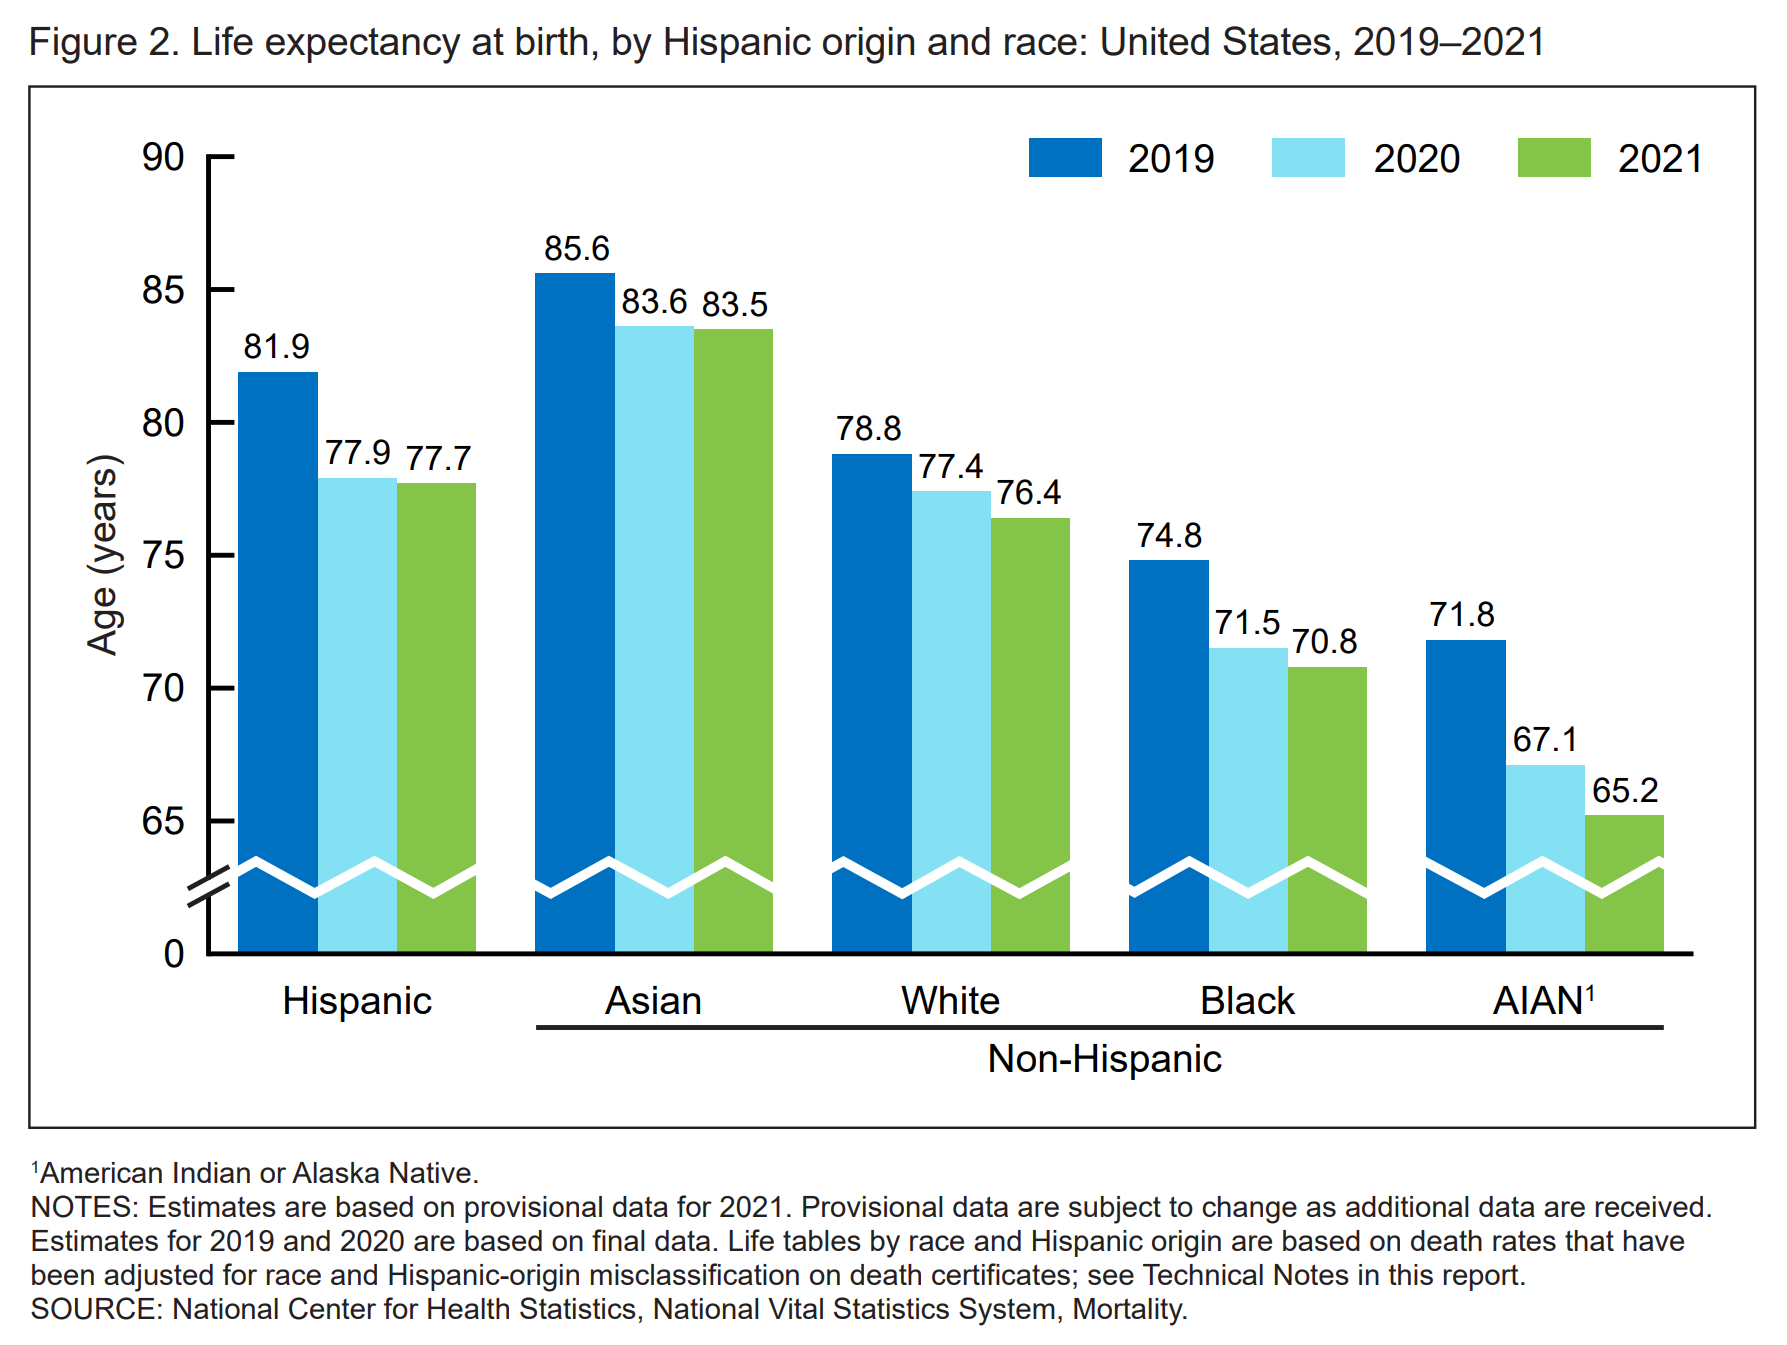 U.S. life expectancy at birth, by Hispanic origin and race, 2019-2021. Graphic: NCHS